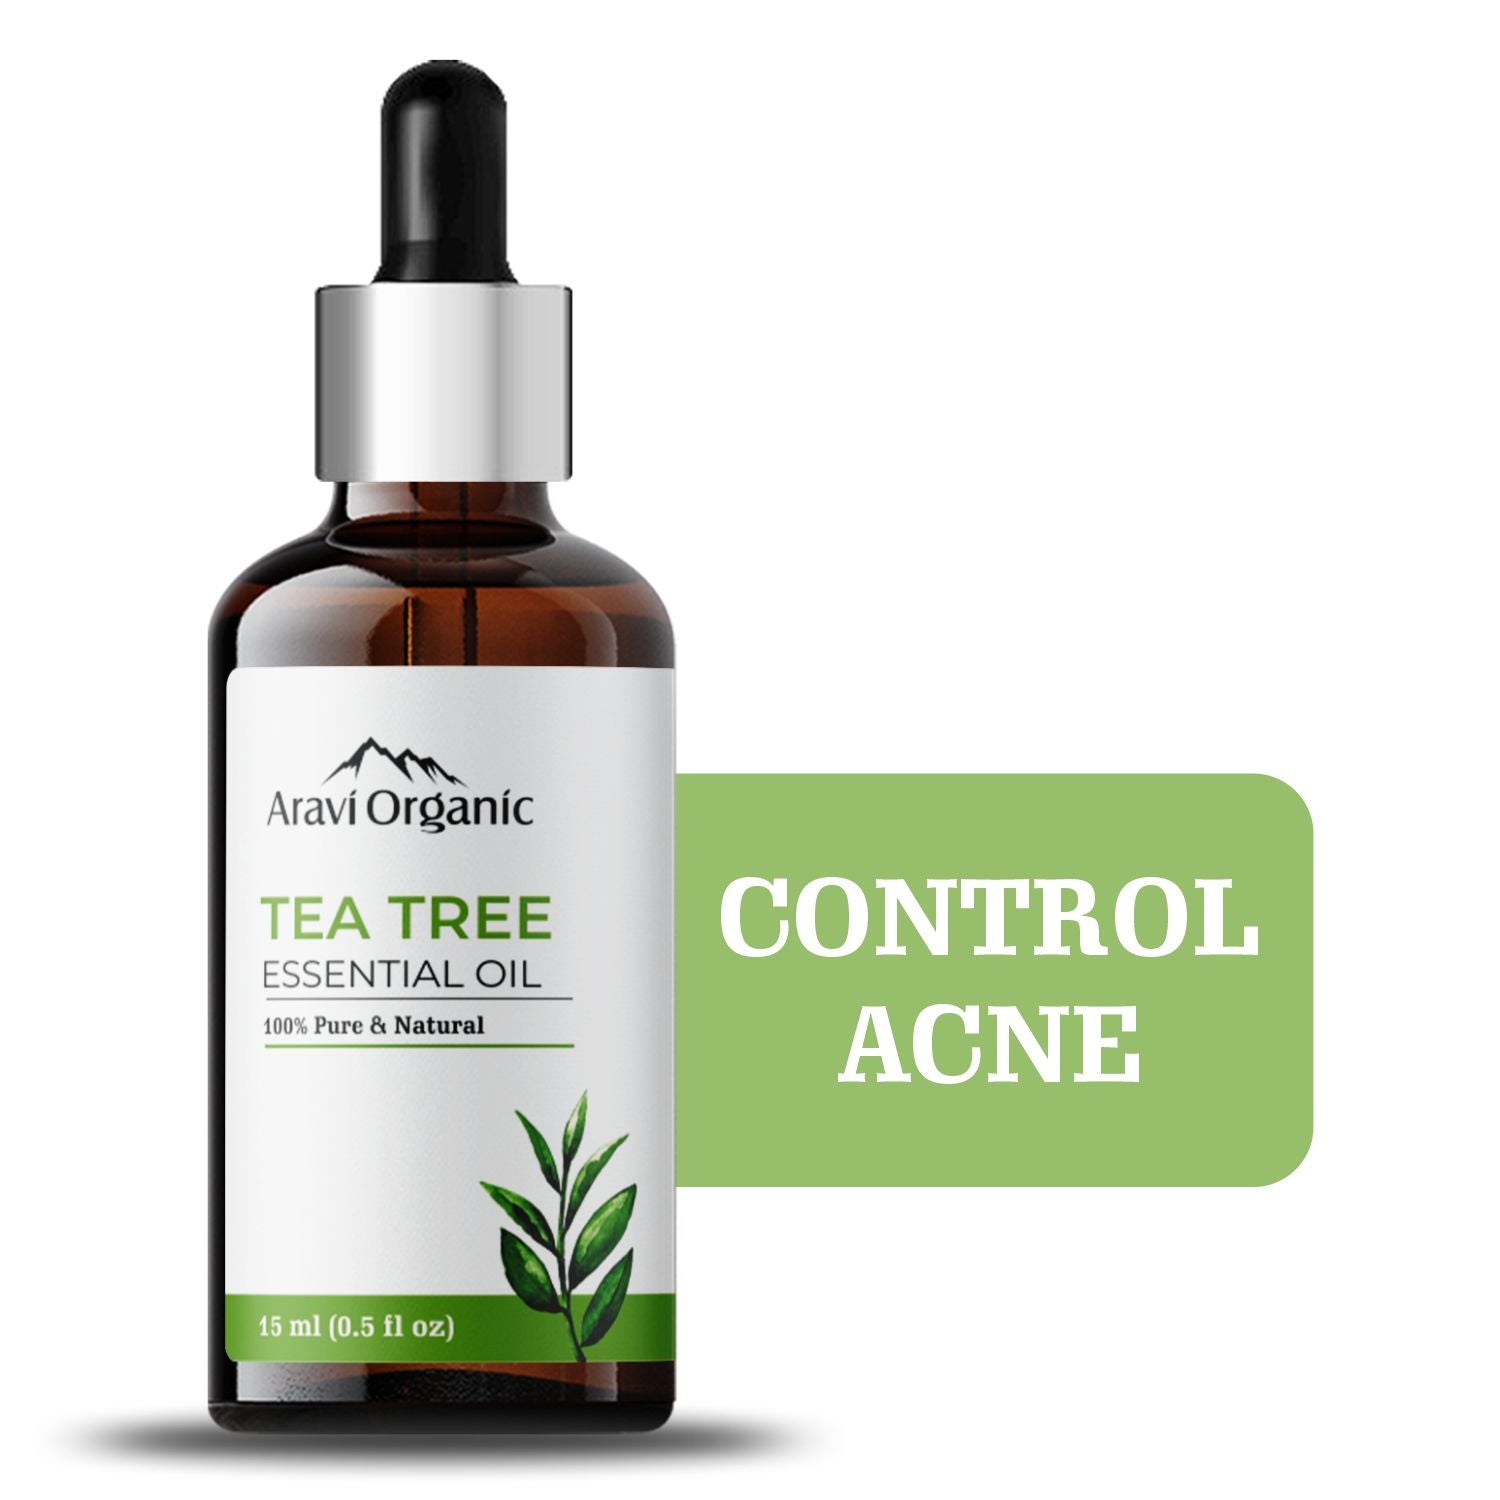 Tea Tree Essential Oil | 100% Natural & Pure Oil for Skin Acne, Pimple, Face & Hair Care